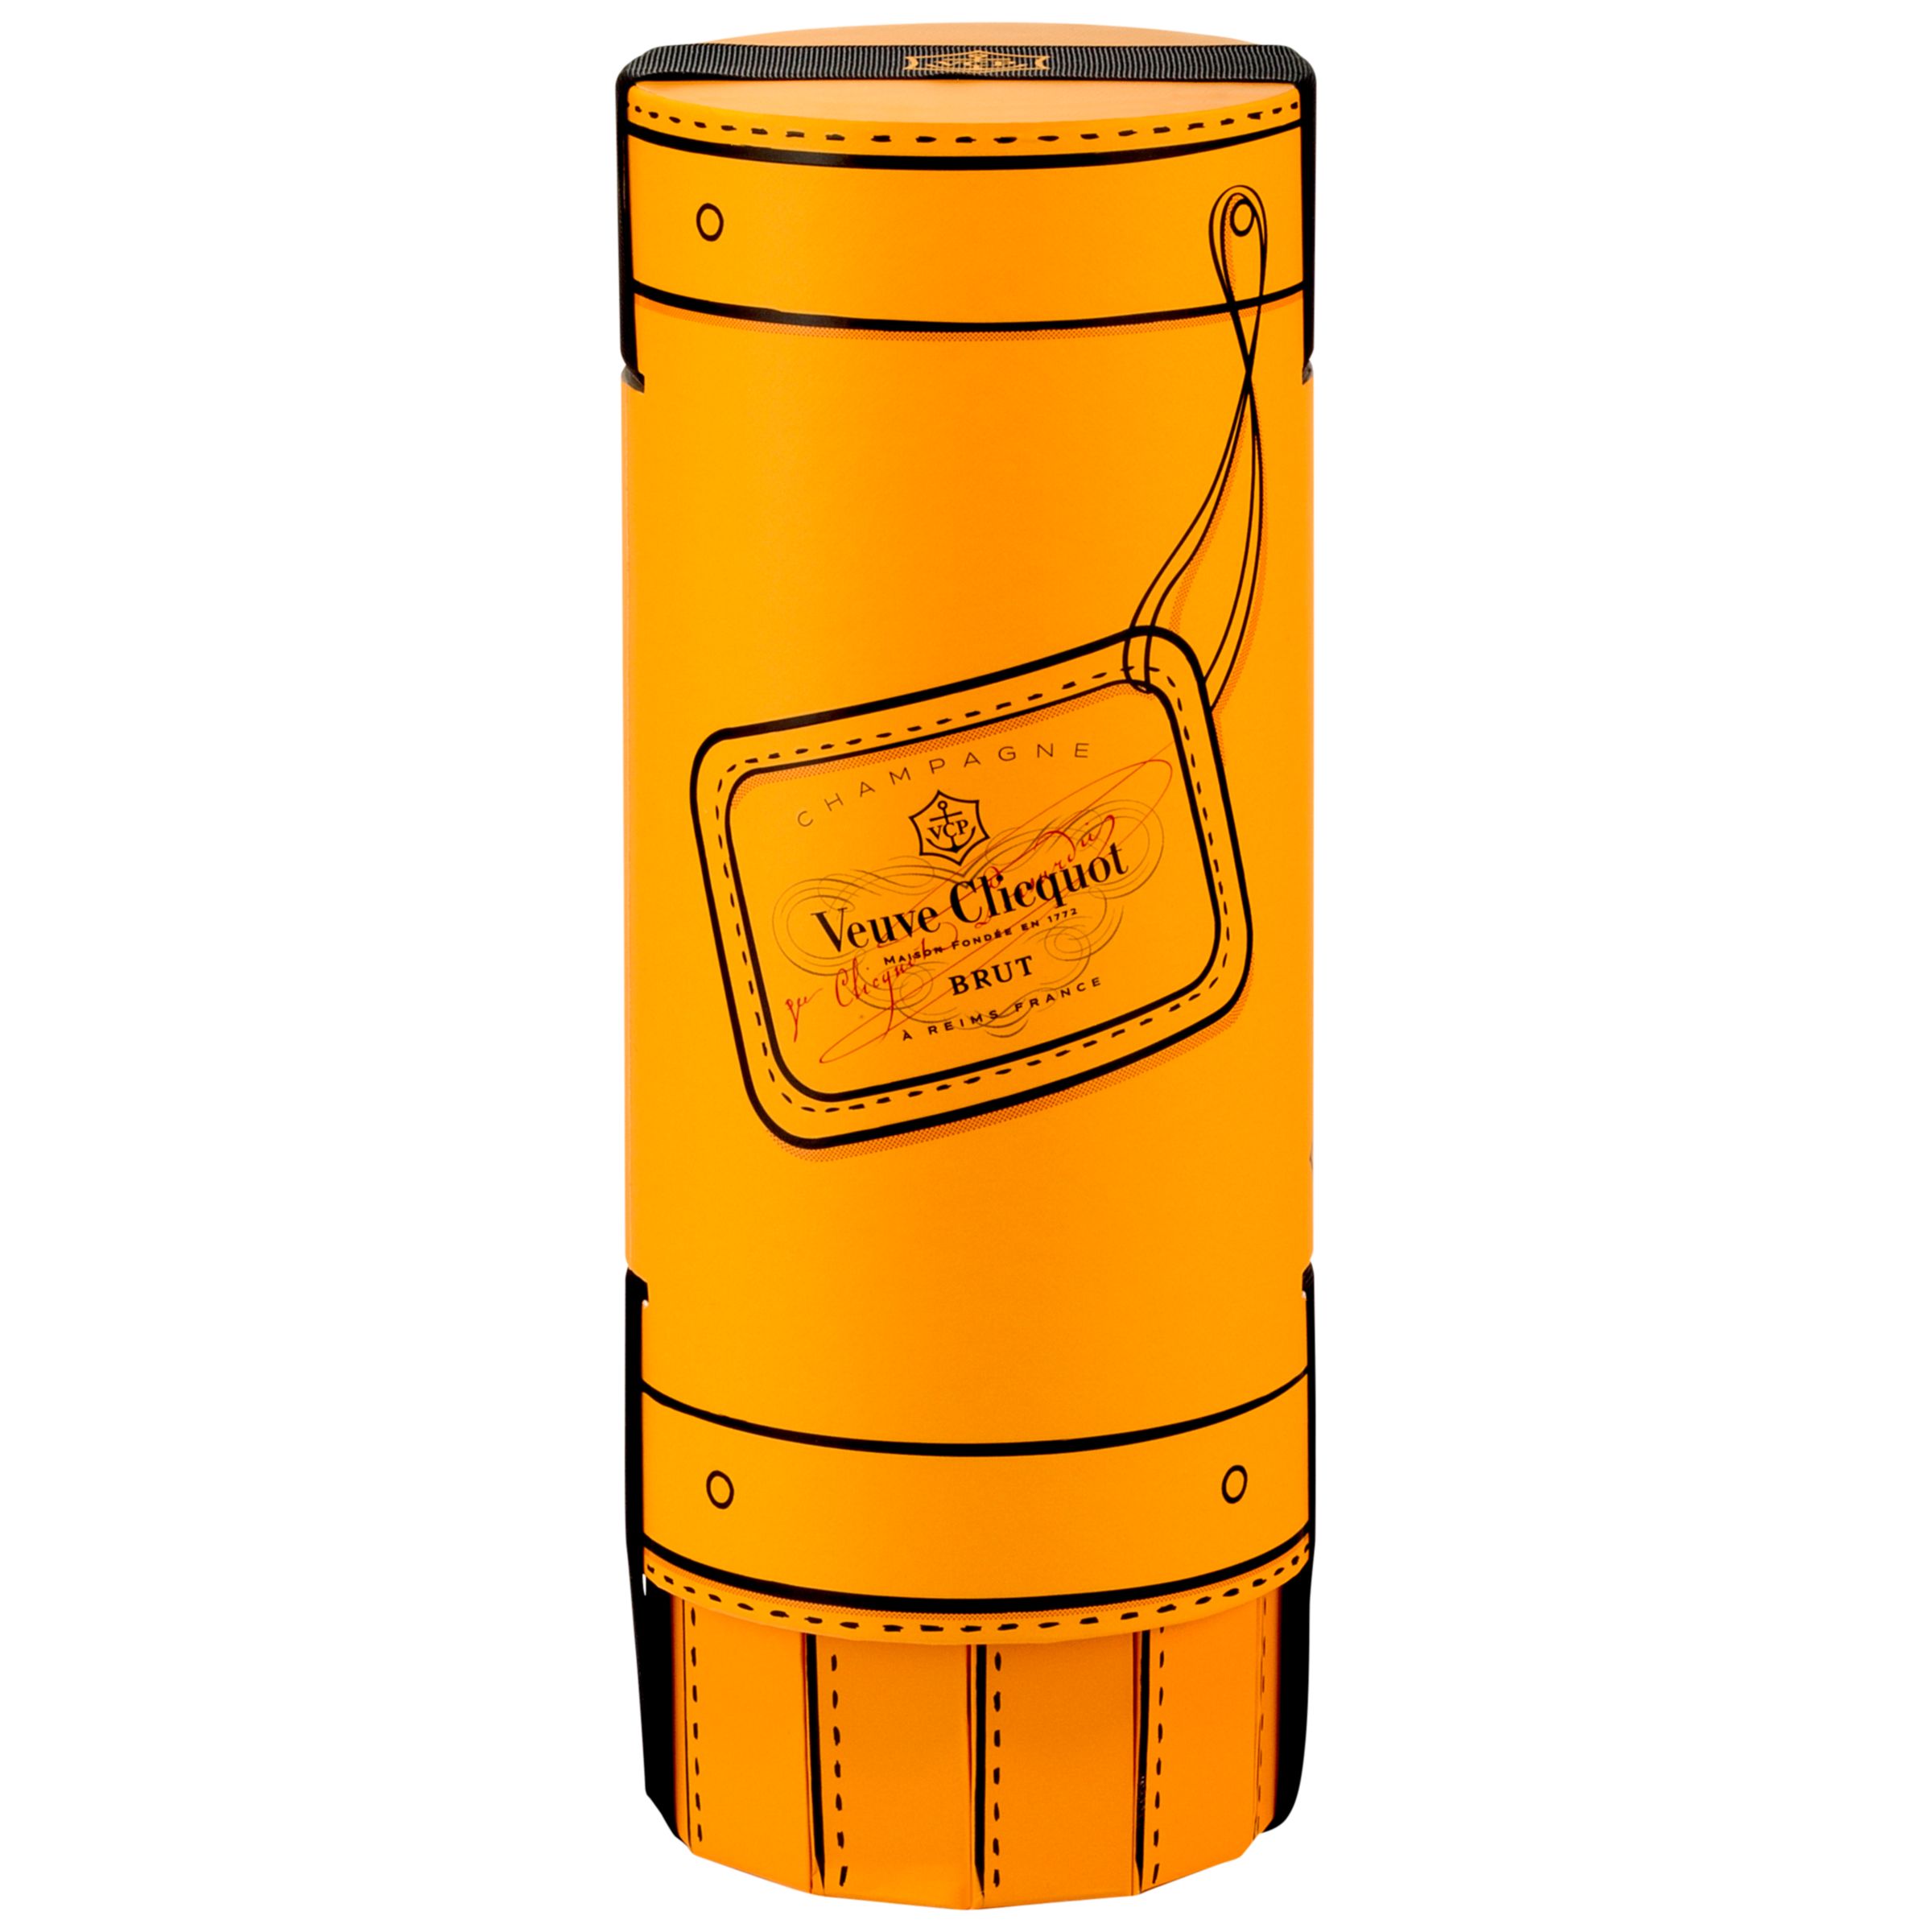 Veuve Clicqout Yellow Label Champagne Brut 75cl Online At Johnlewis Com